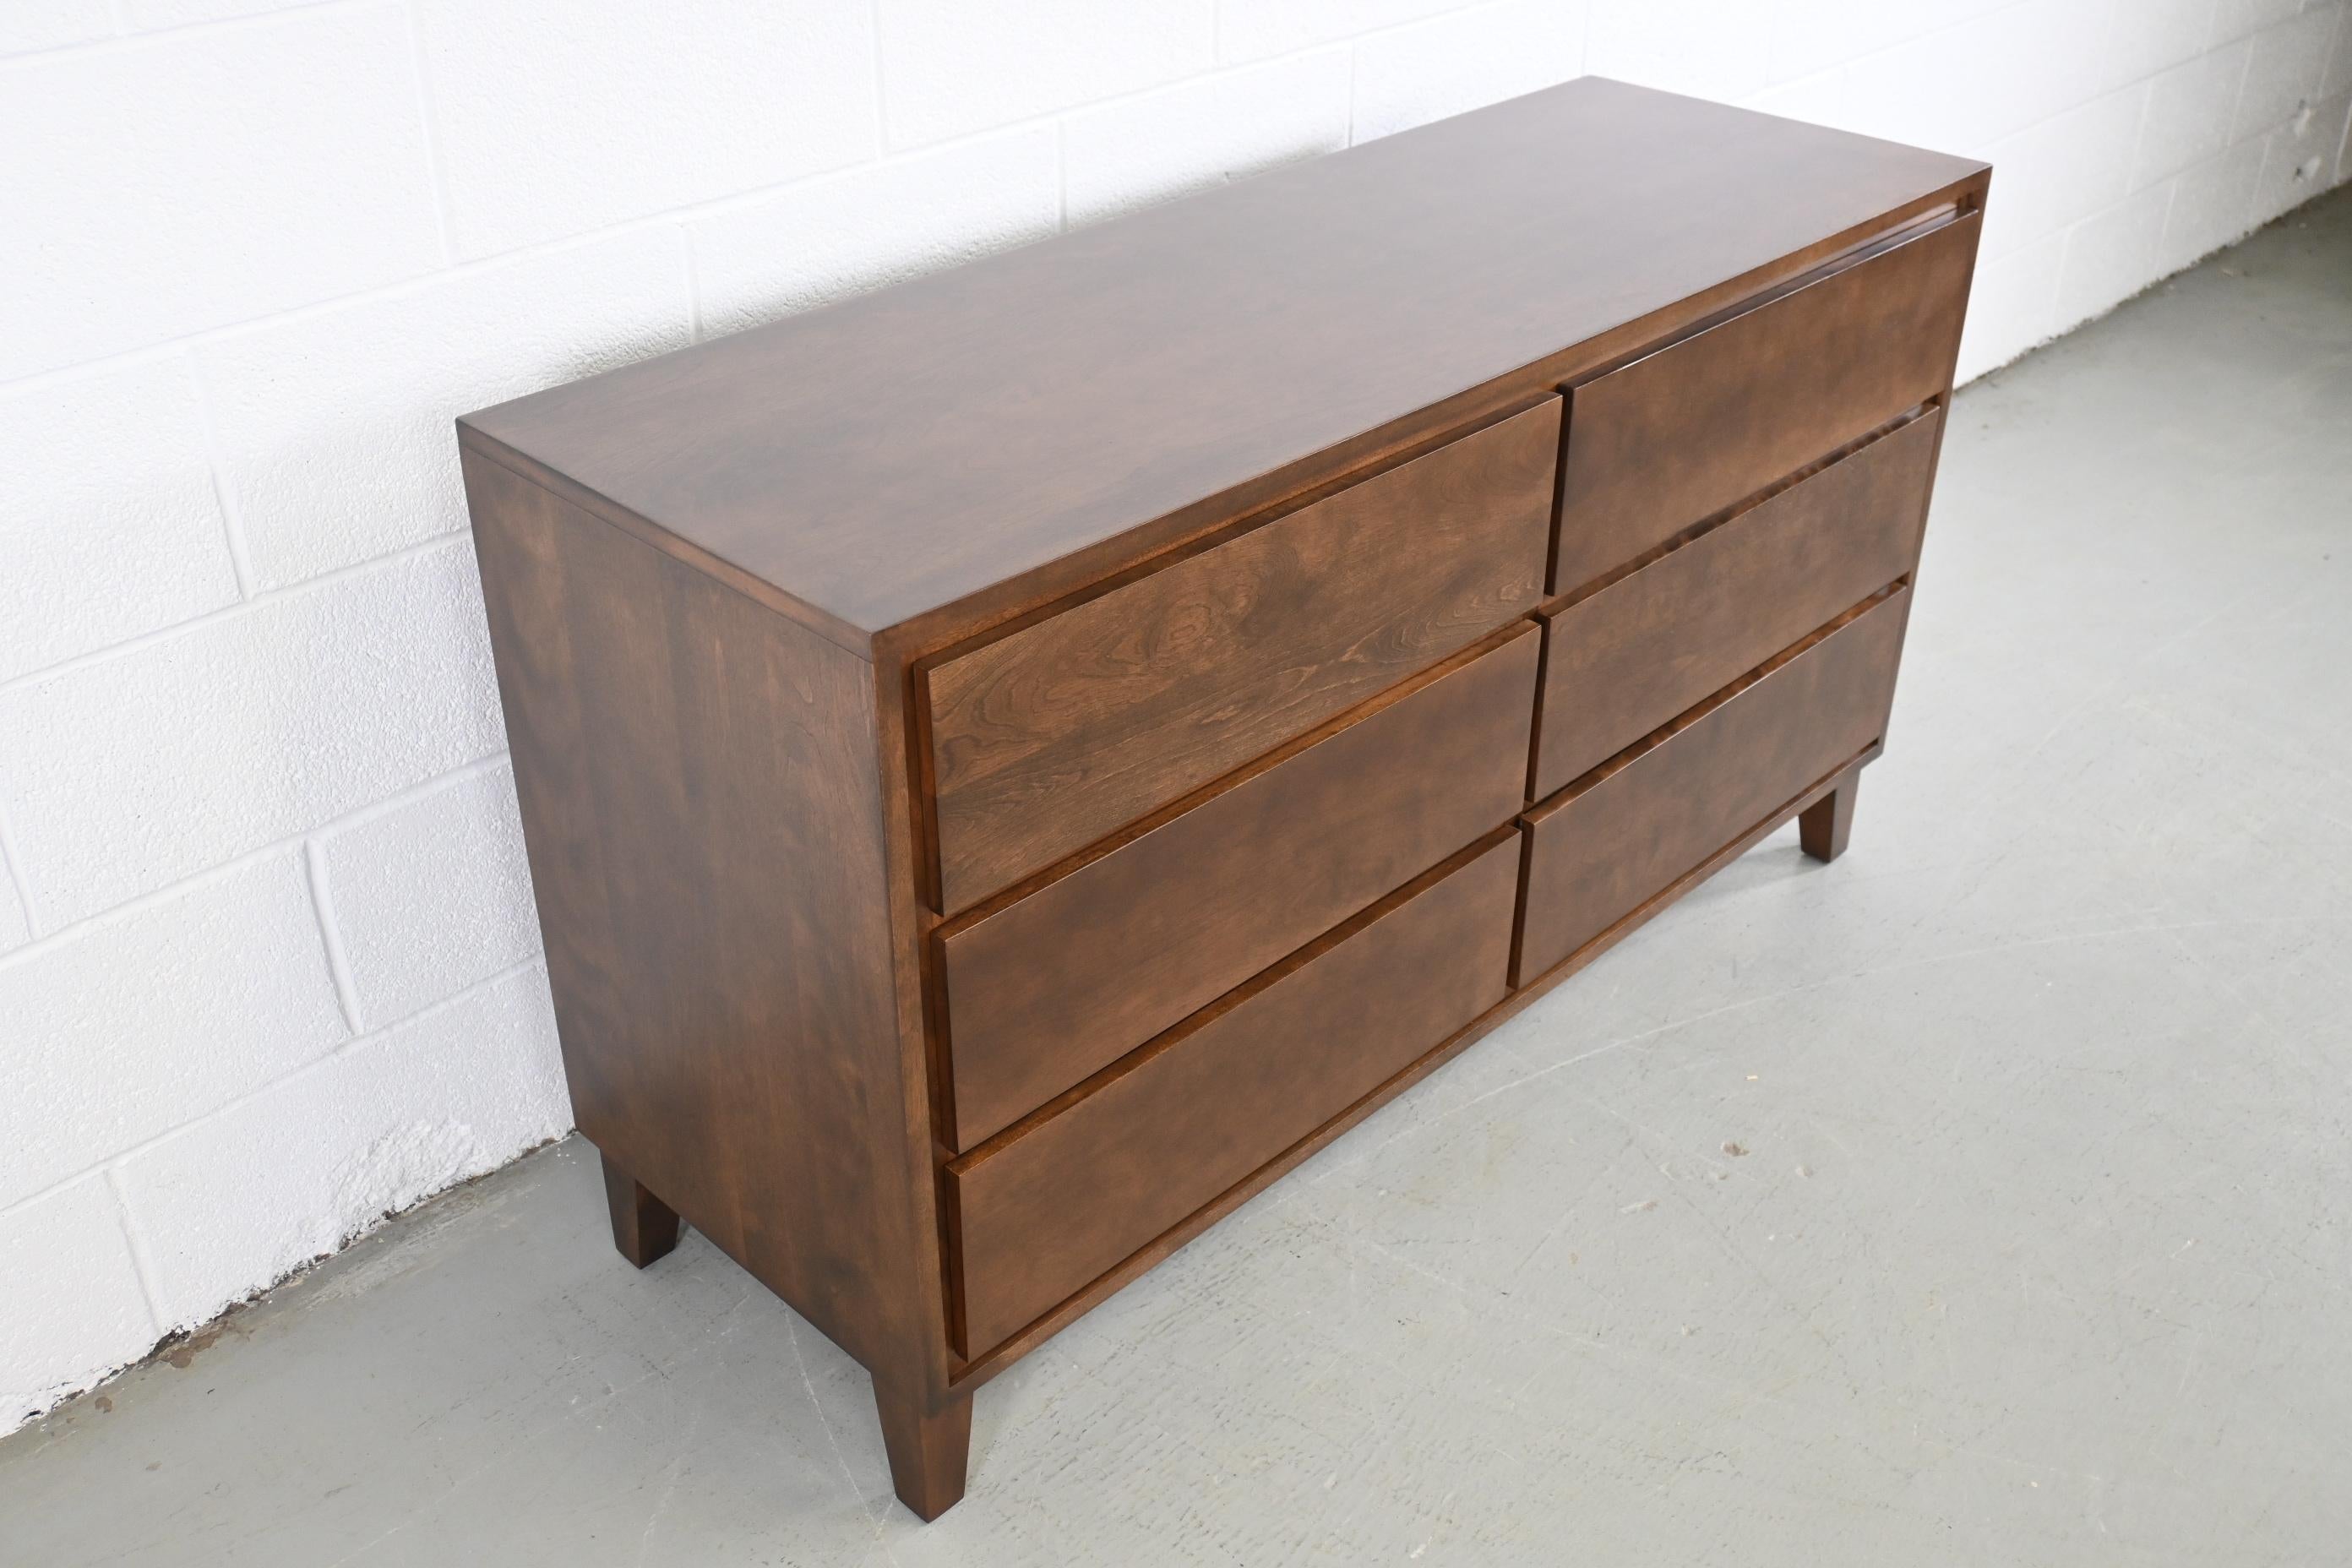 Leslie Diamond for Conant Ball Furniture Mid Century Modern Dresser In Excellent Condition For Sale In Morgan, UT